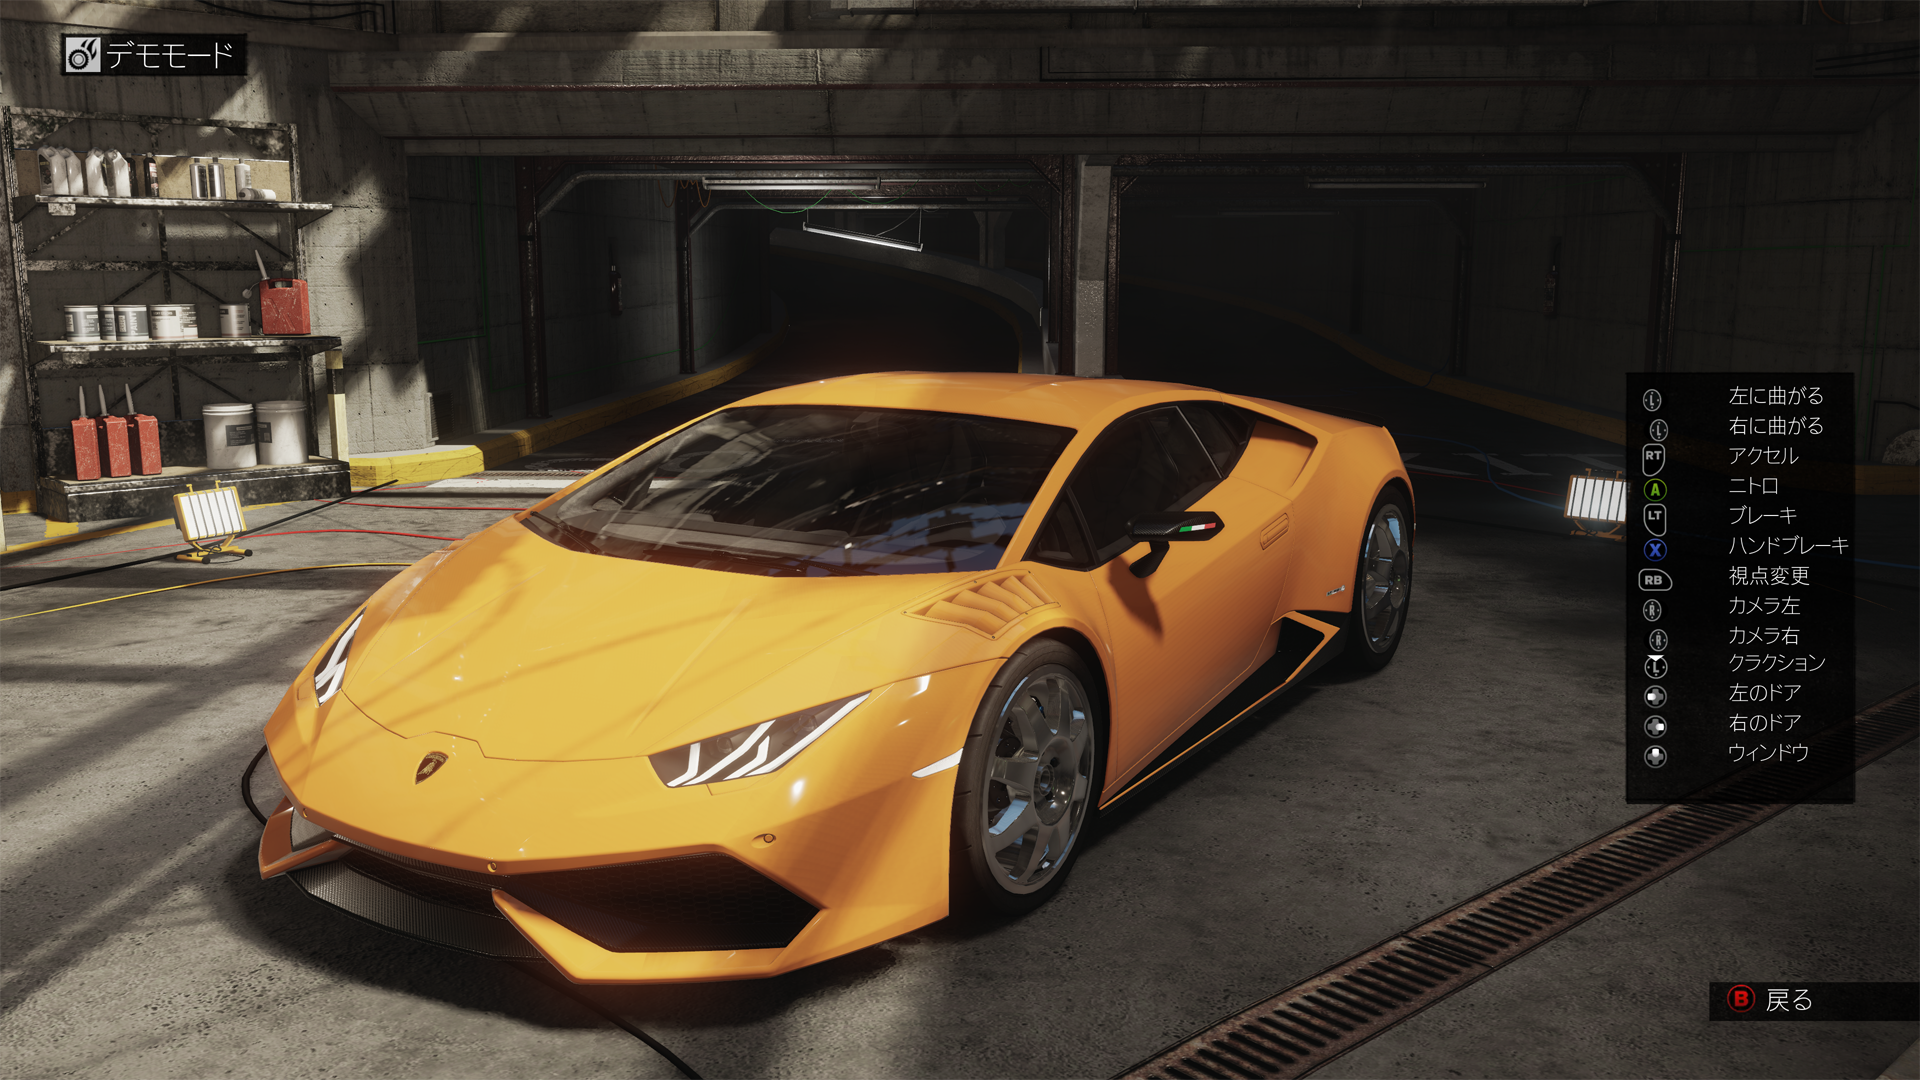 TheCrew 2016-12-02 01-14-51-570_1920.png